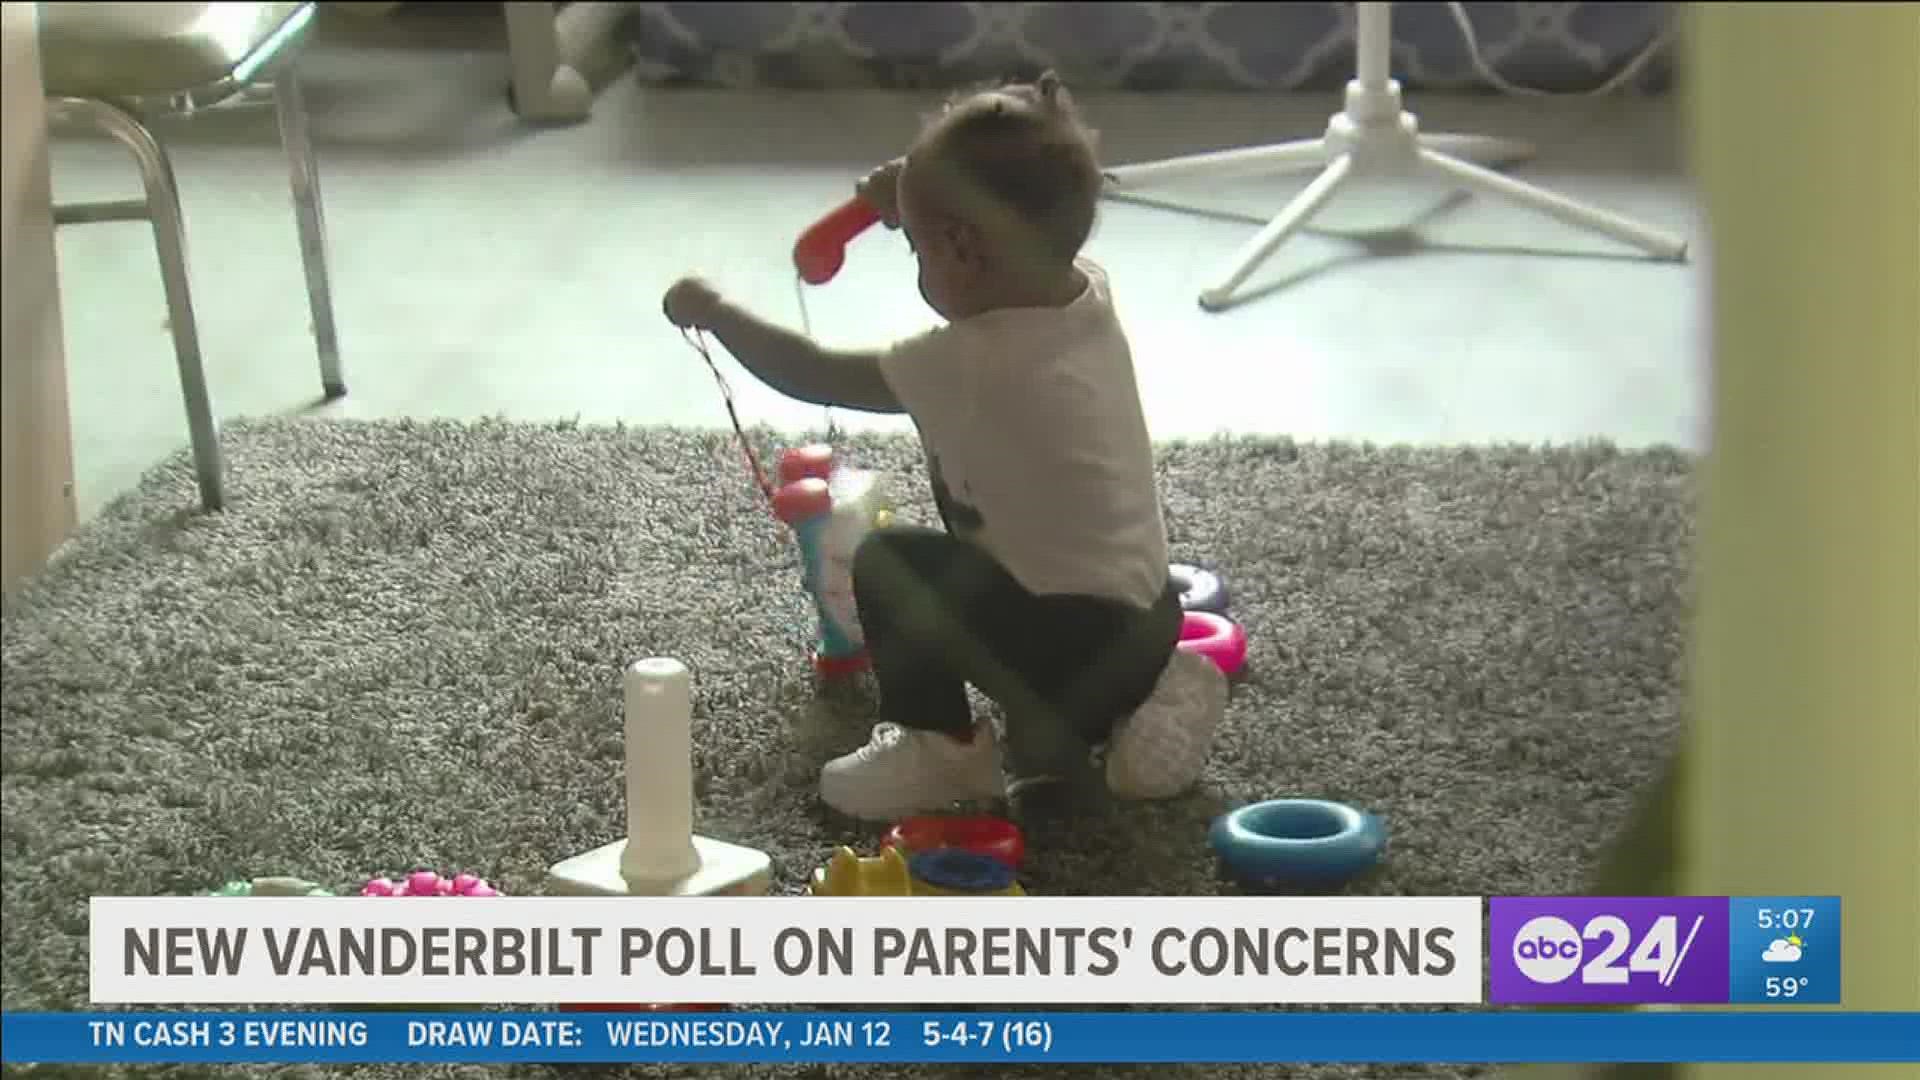 According to a new poll from the Vanderbilt Center for Child Health Policy, education and school quality is the number one concern for Tennessee parents.